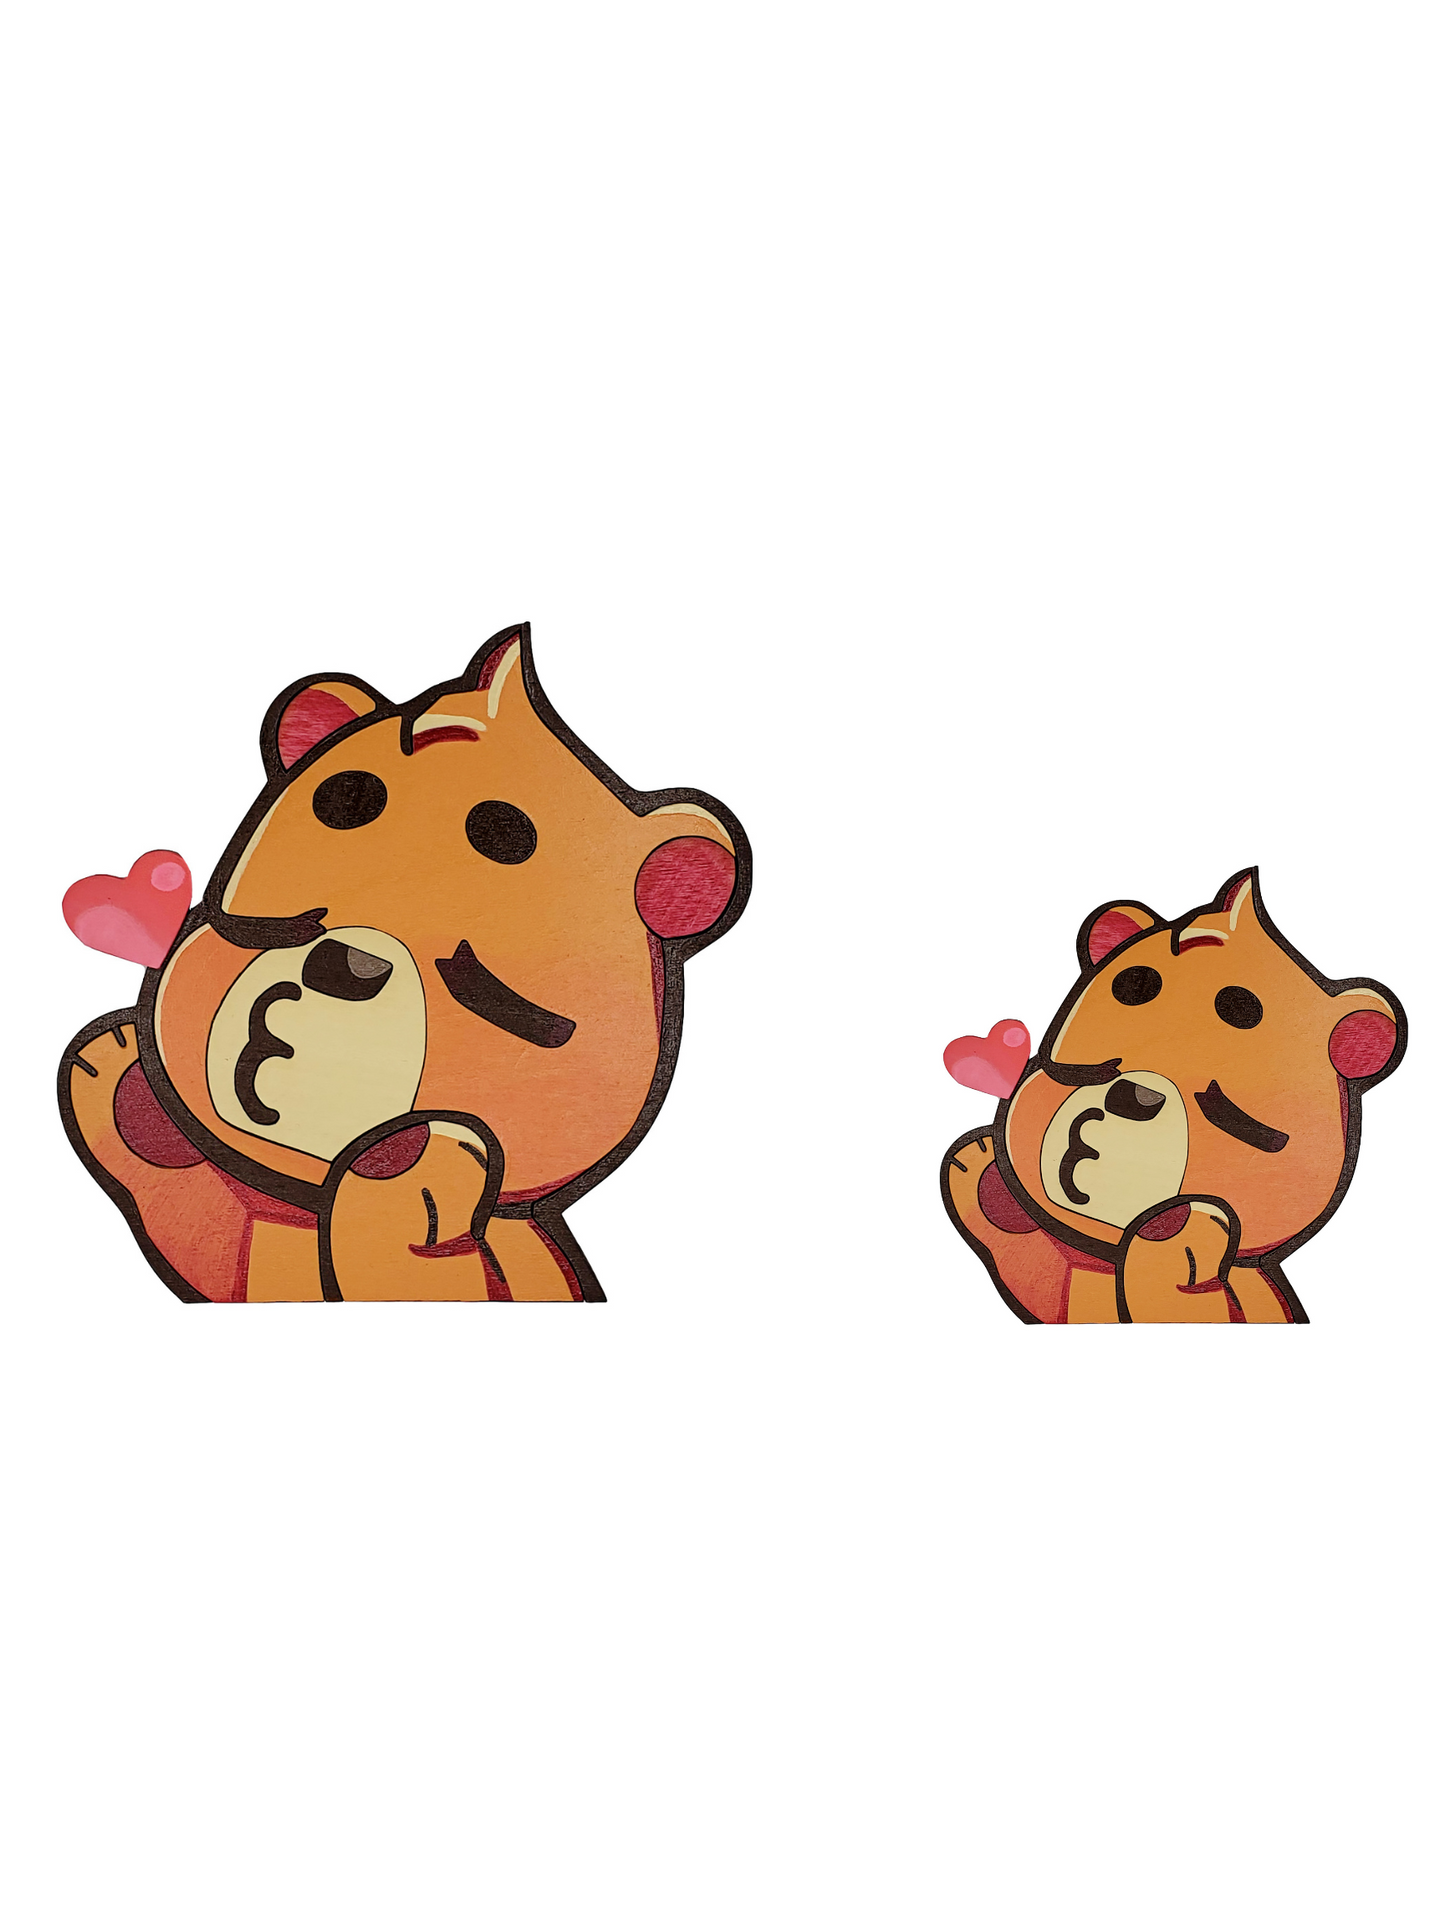 Burr- Replica Emote Wood Art-sleepiKISS **Permanent Collection** (Streamer Purchase)